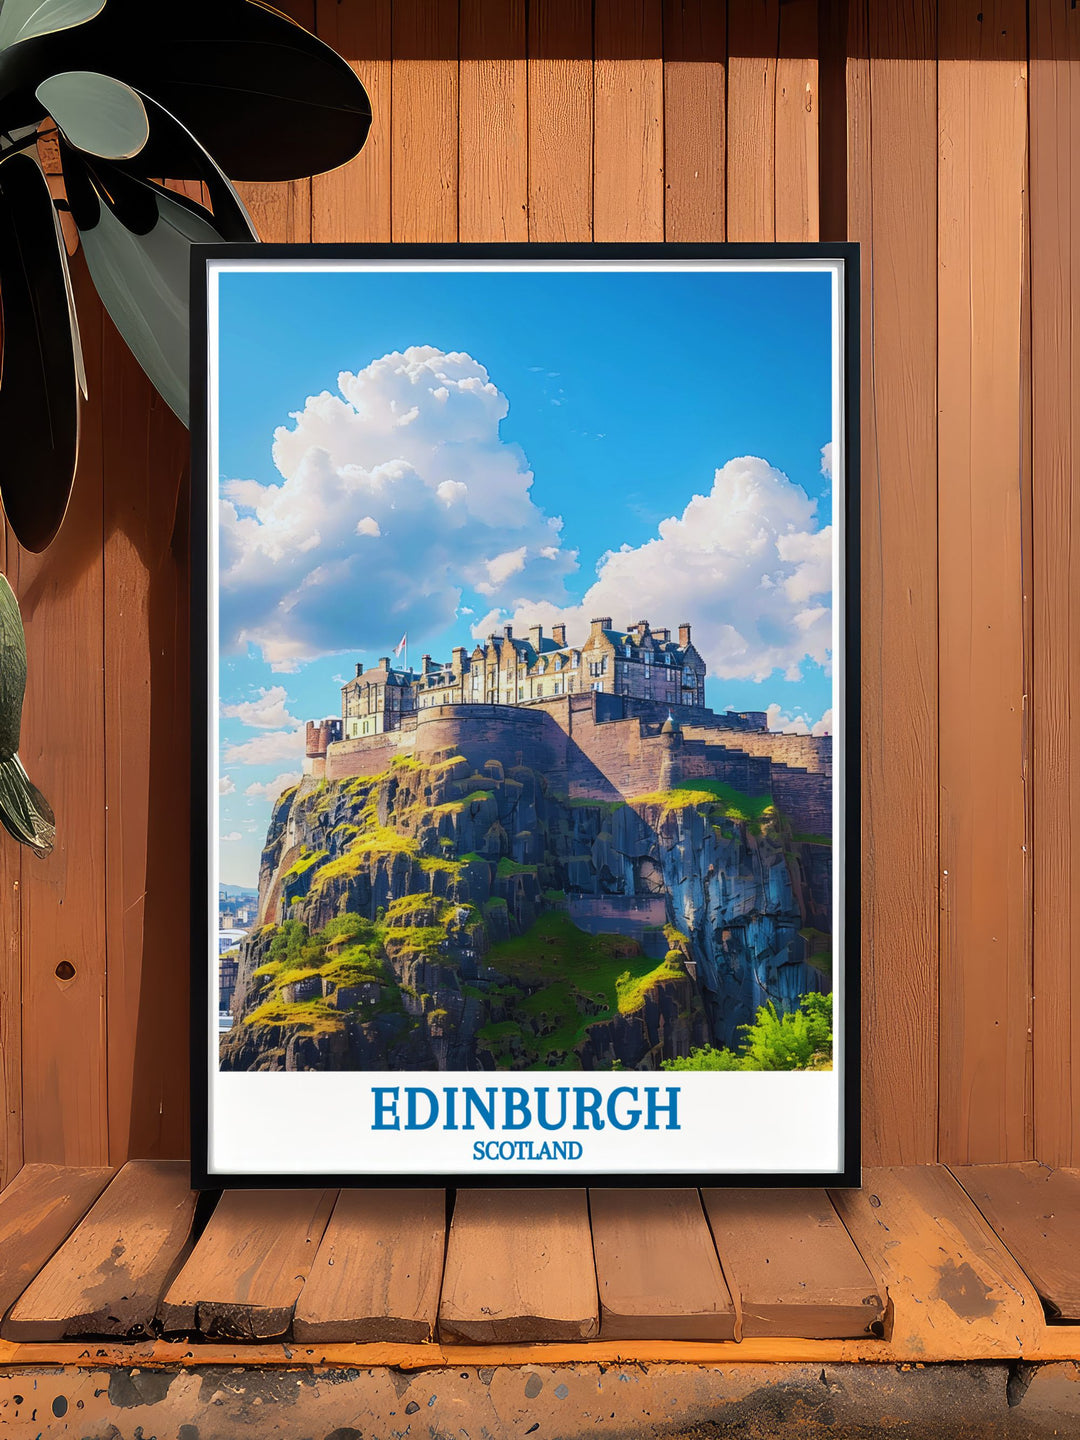 Stunning wall art of the Royal Mile in Edinburgh, capturing the charm and cultural richness of this iconic street, perfect for any home.